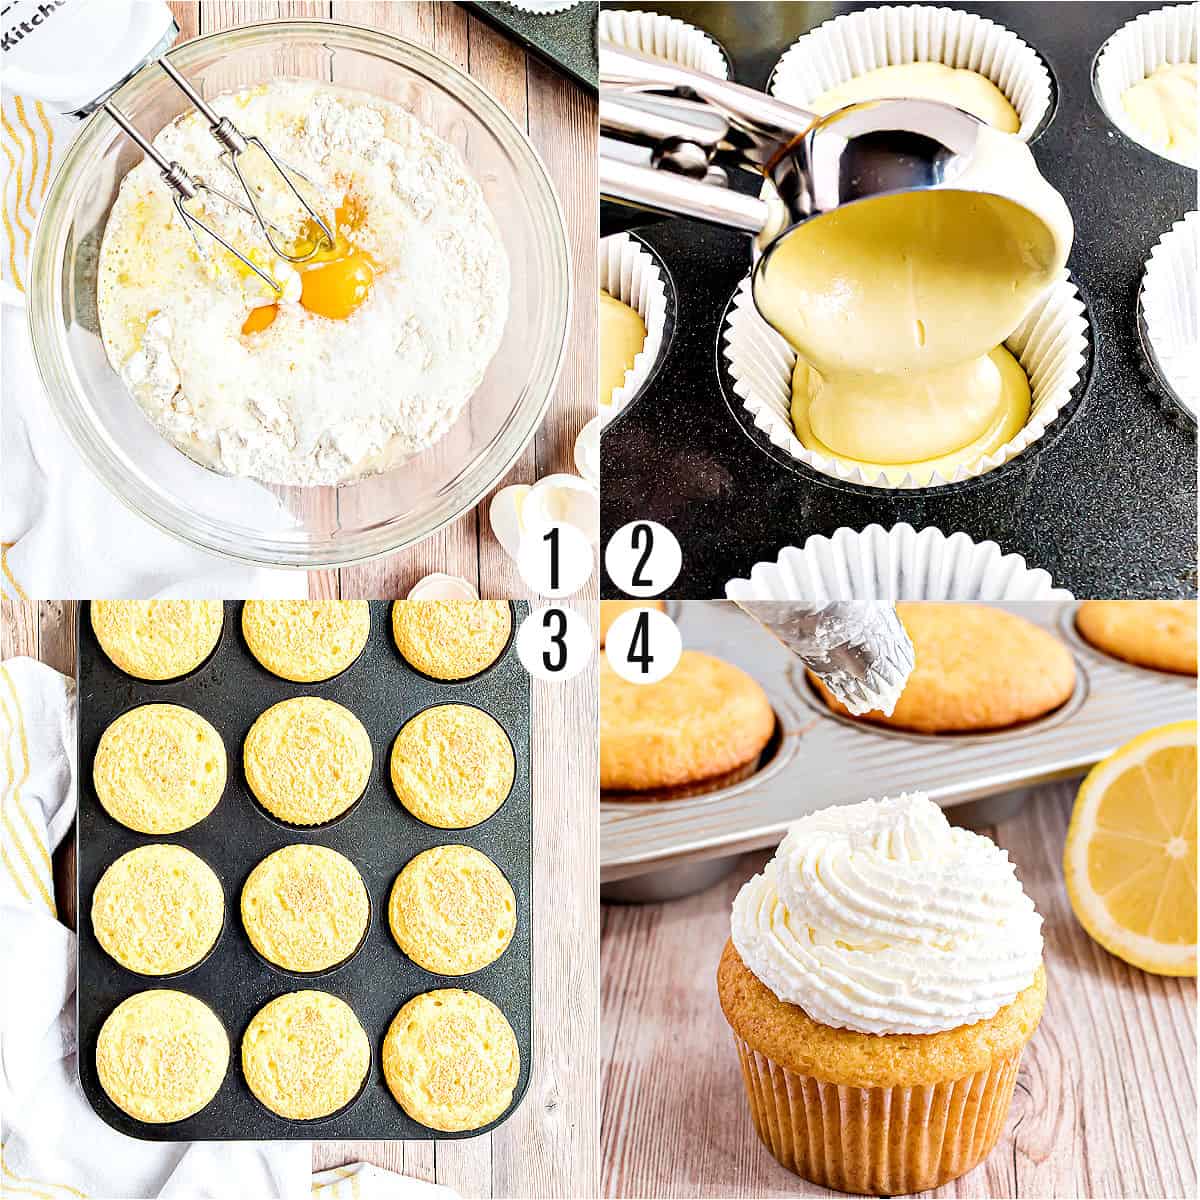 Step by step photos showing how to make lemon pudding cupcakes.